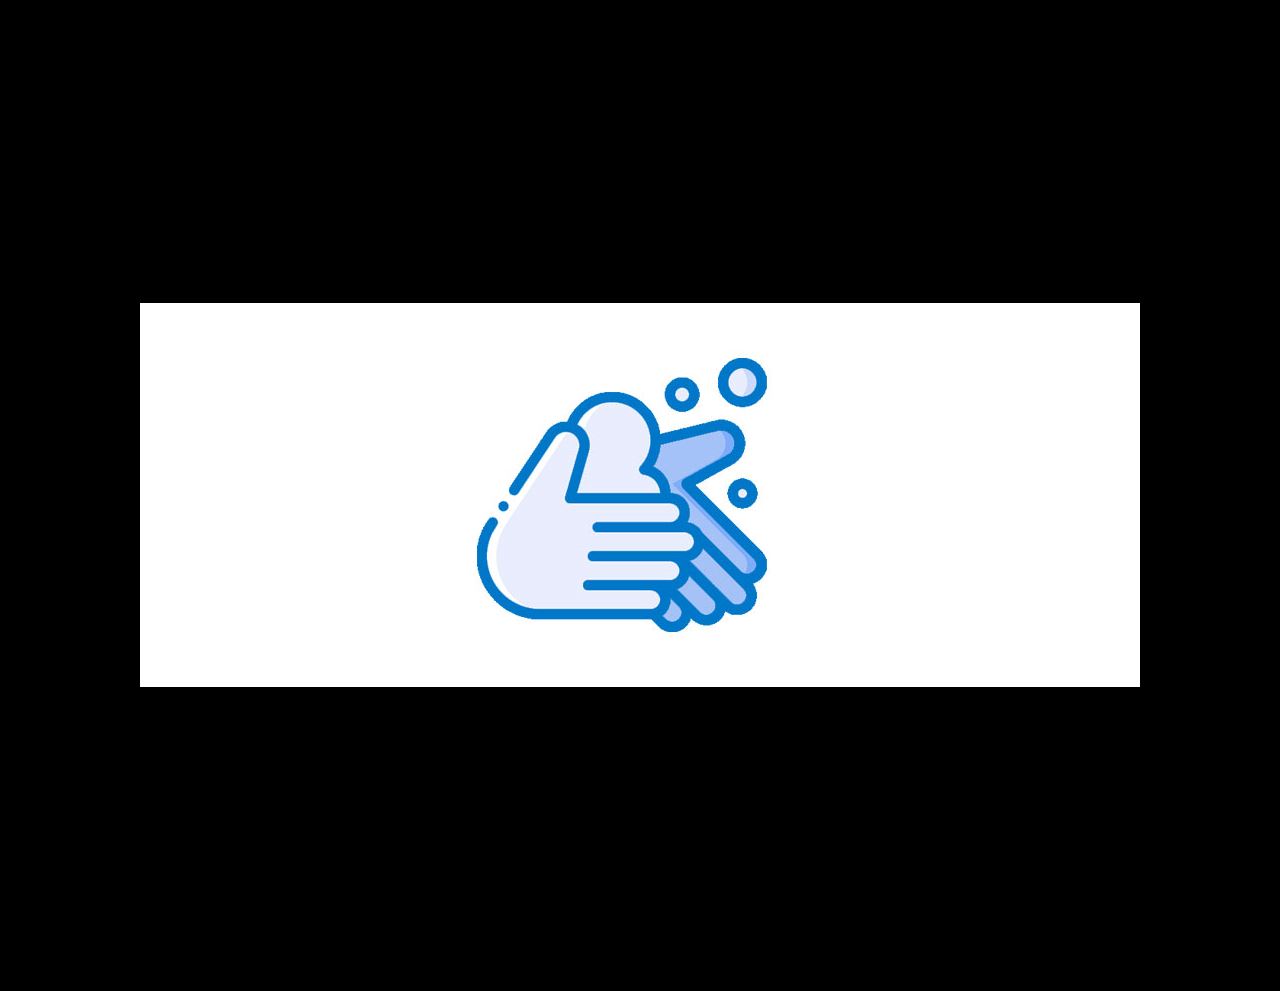 washing hands icon